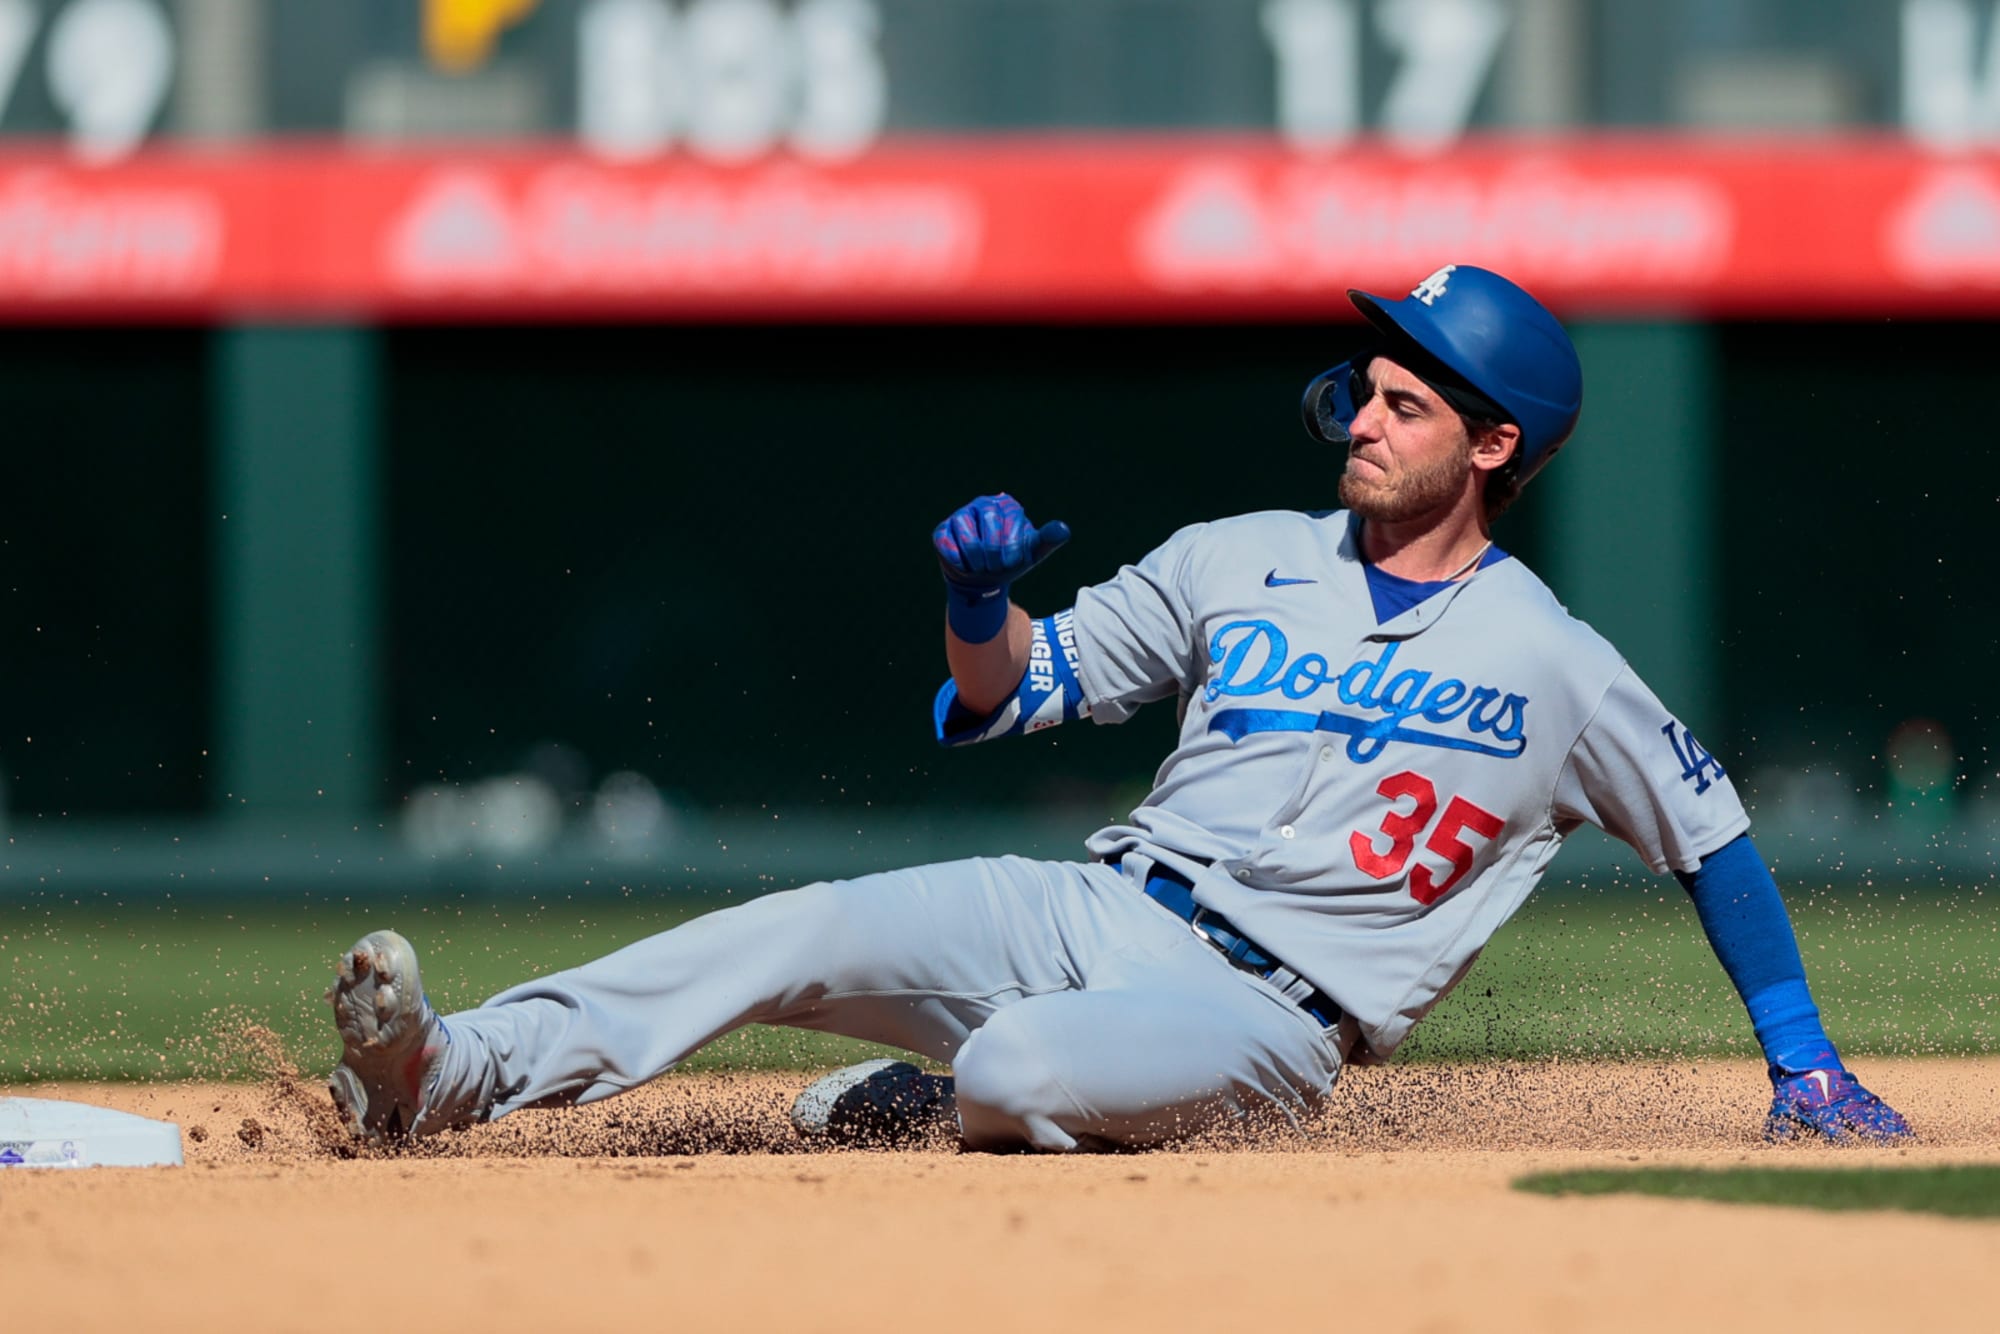 Dodgers: Cody Bellinger's injury just went from bad to worse